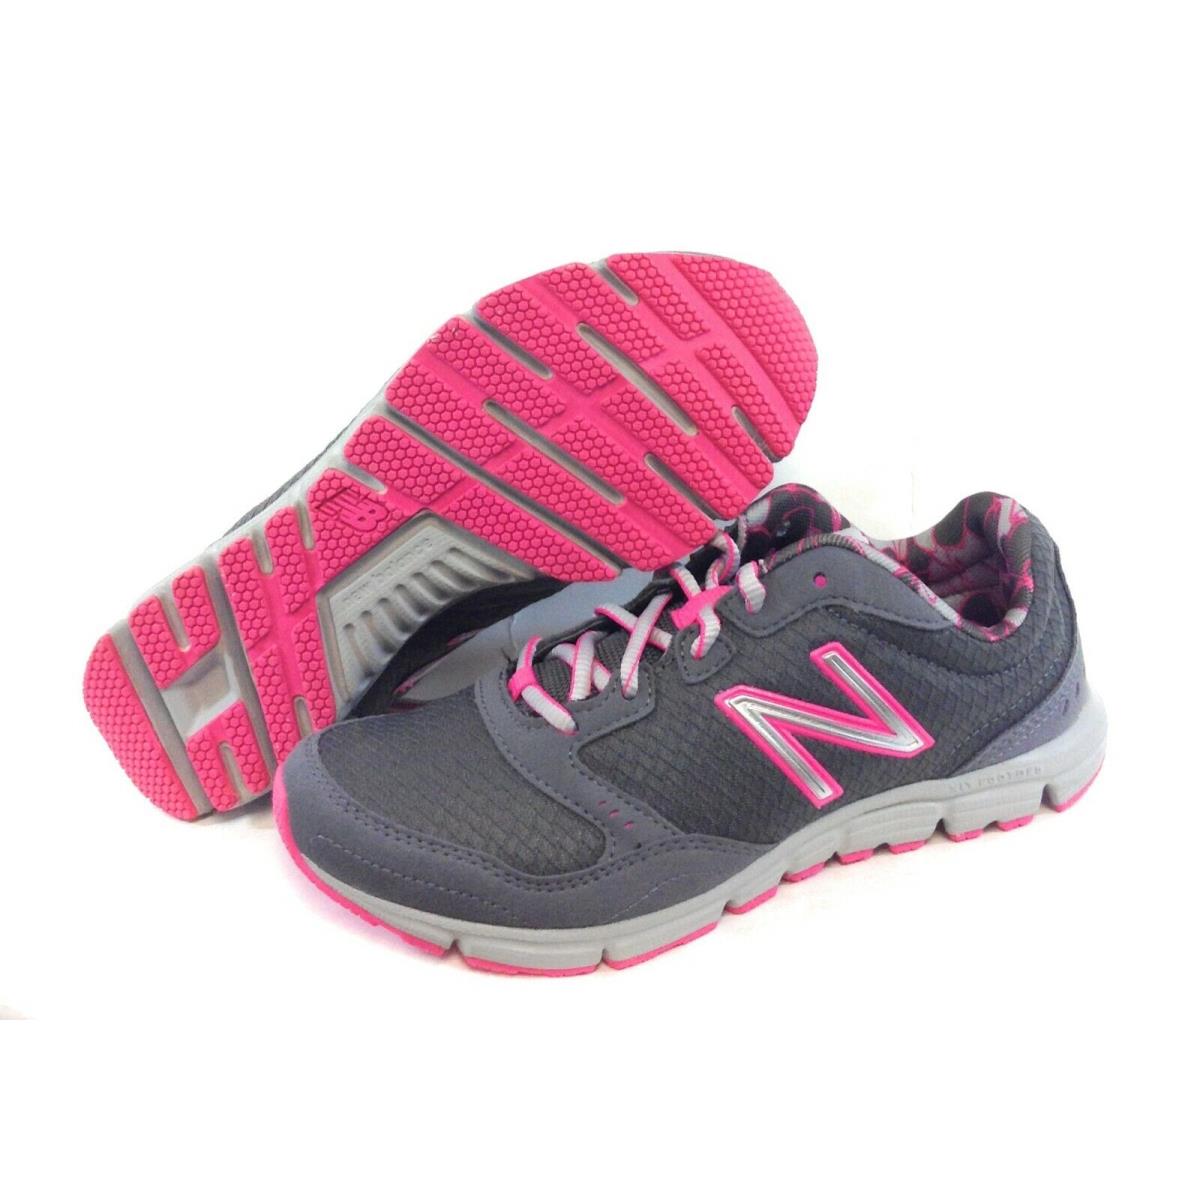 Womens New Balance 630 SP2 Dark Grey Silver Pink Running Sneakers Shoes - Grey